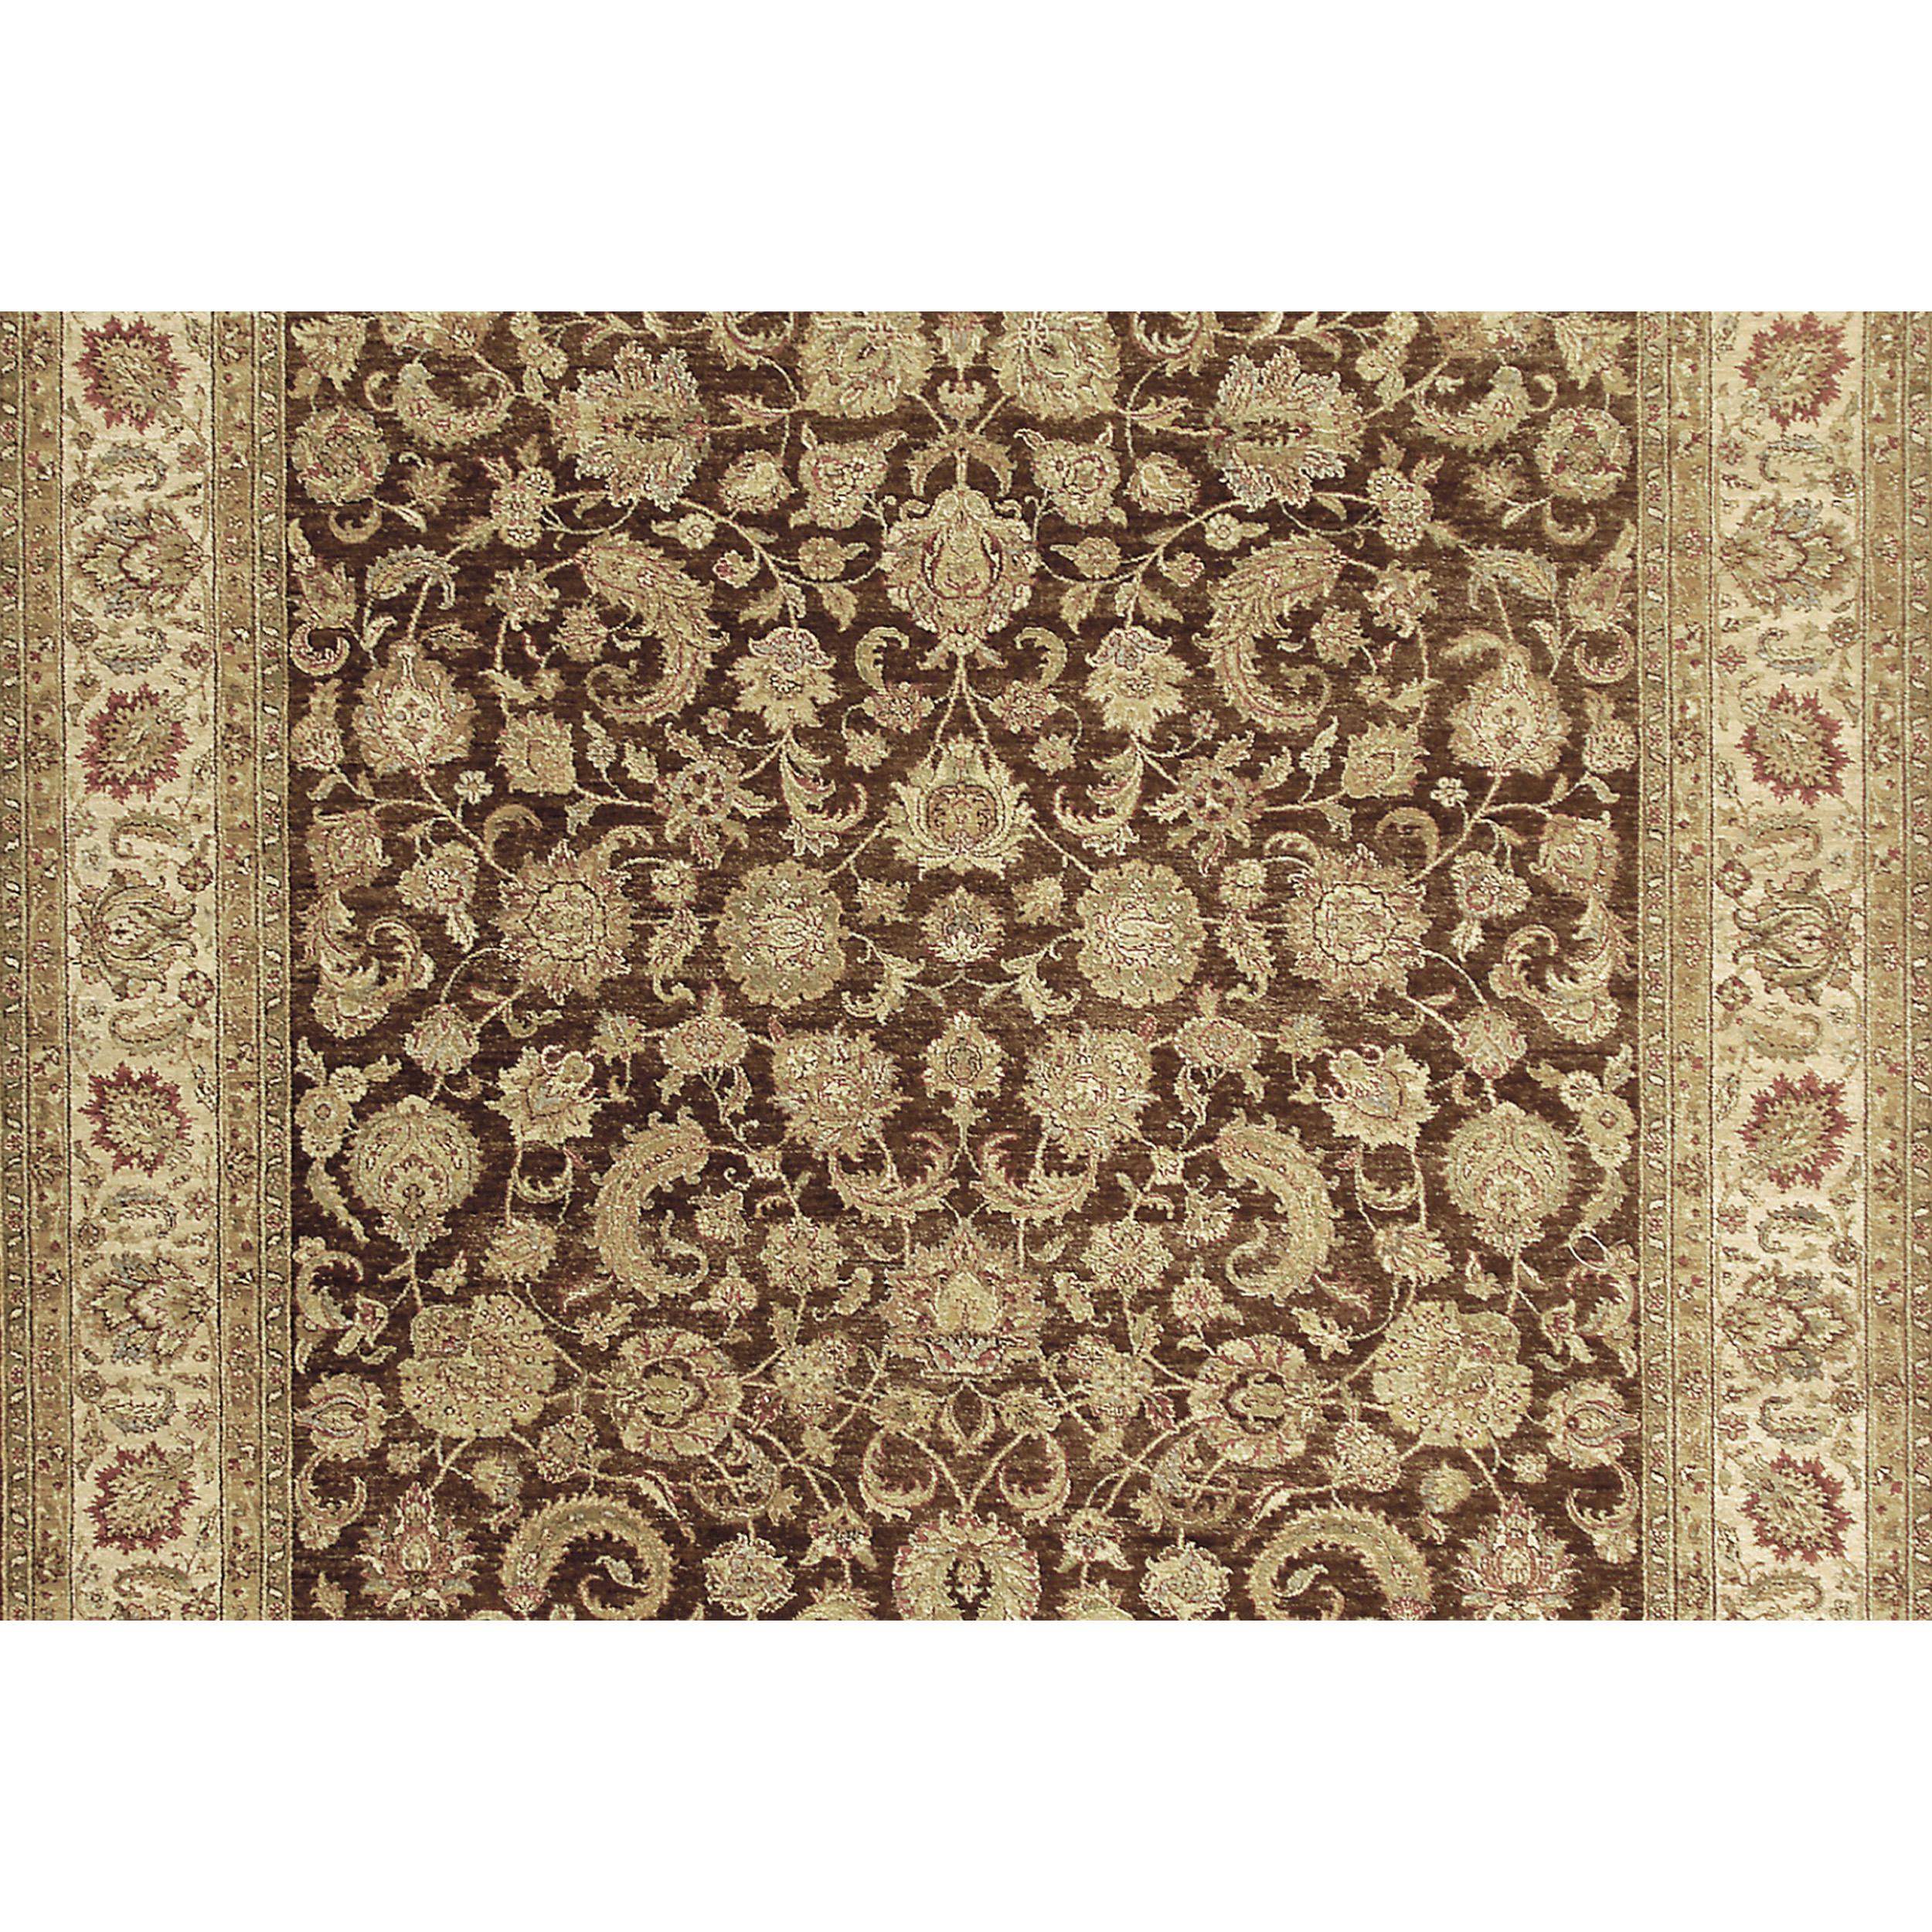 Indian Luxury Traditional Hand-Knotted Brown/Cream 14x28 Rug For Sale